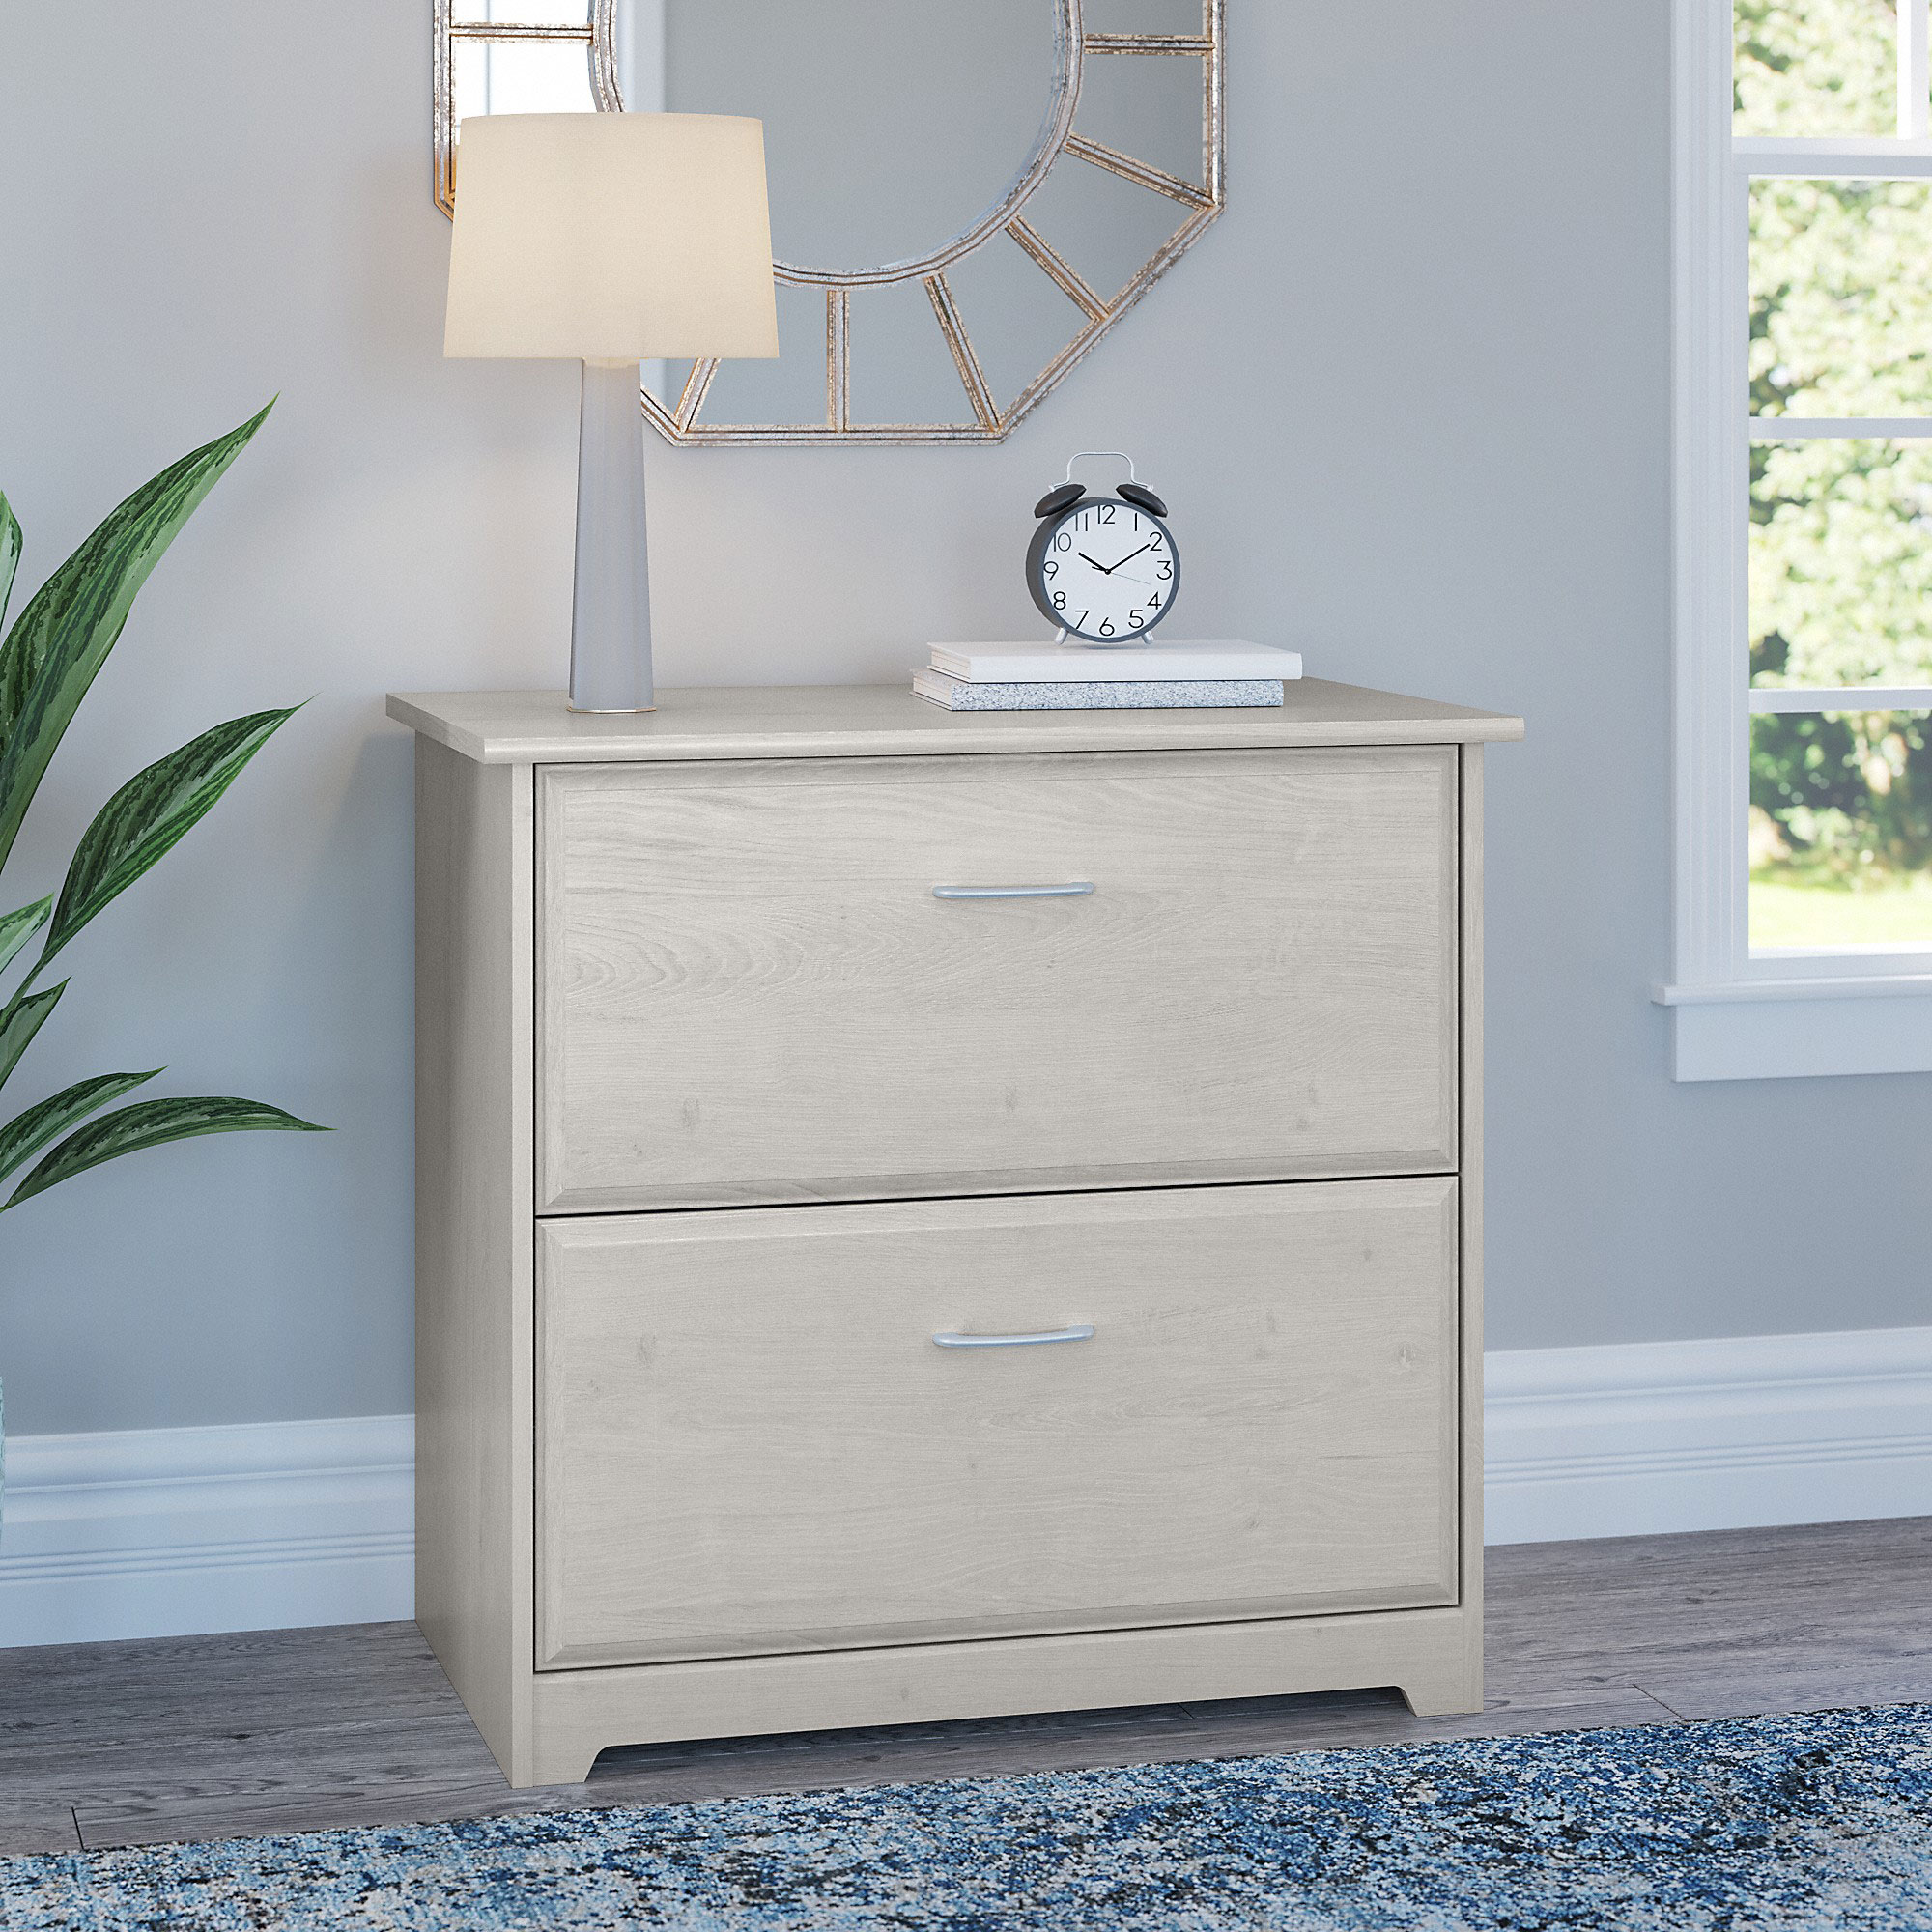 Furniture Cabot 2 Drawer Lateral File Cabinet in Linen White Oak by Bush